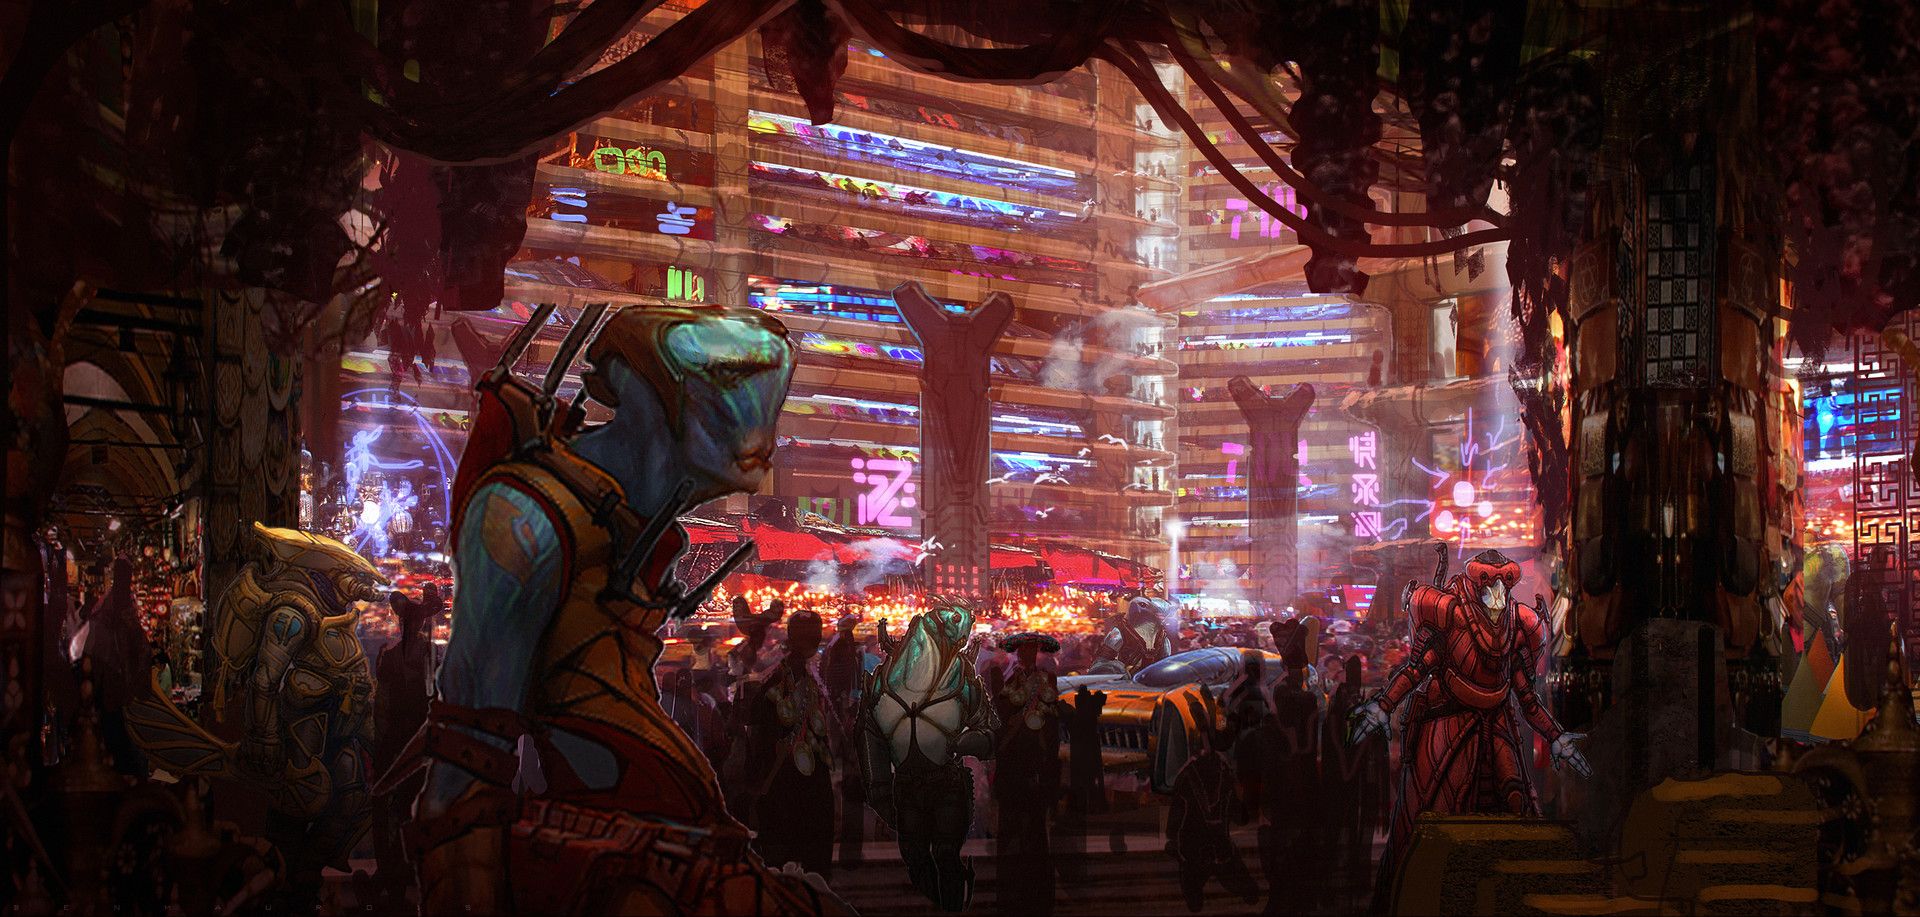 Wallpaper, 1920x917 px, aliens, Ben Mauro, Big Market, colorful, concept cars, crowds, science fiction, Valerian and the City of a Thousand Planets 1920x917